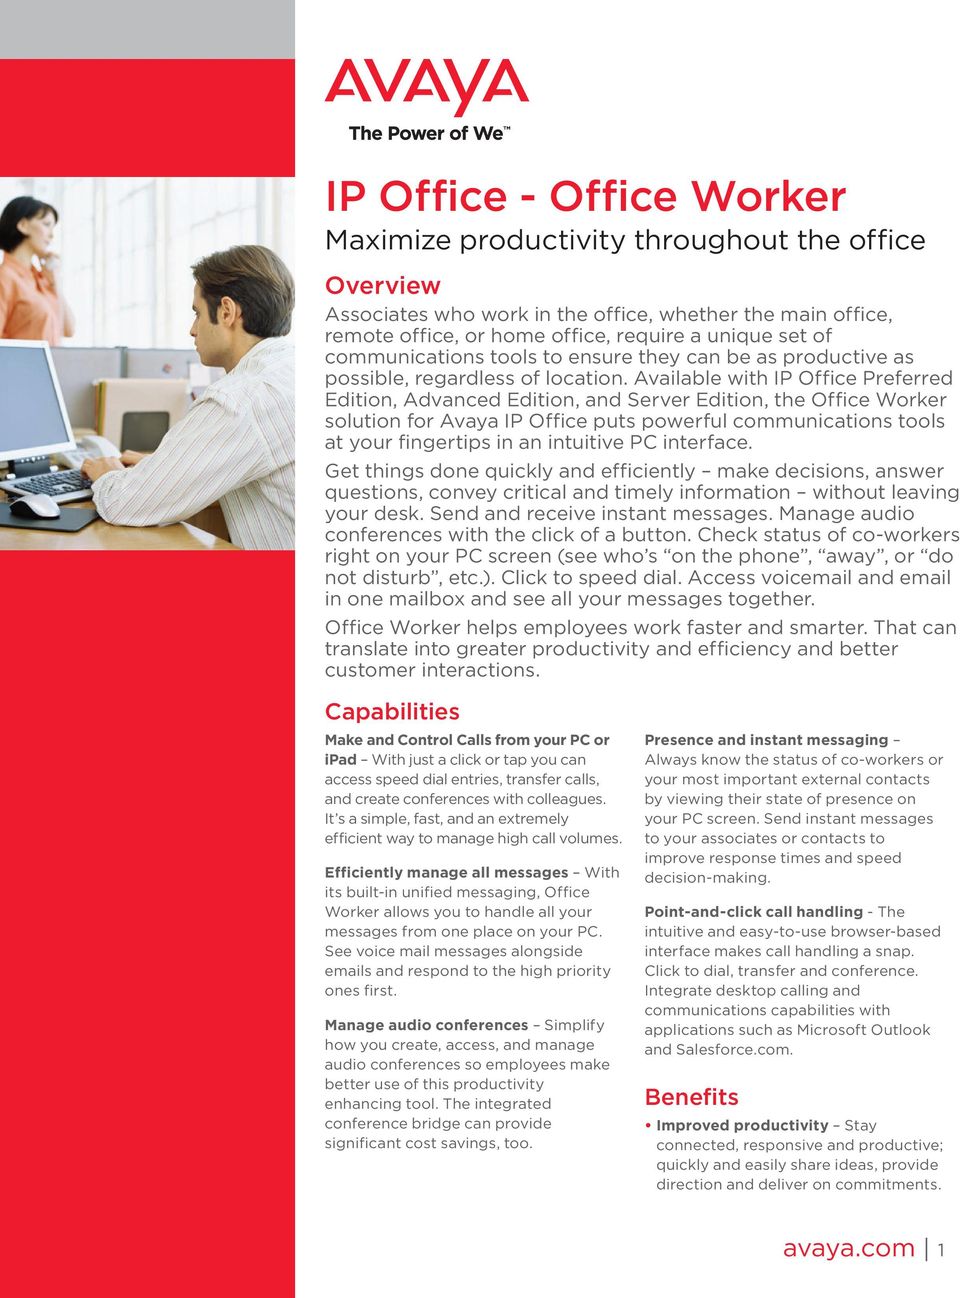 Available with IP Office Preferred Edition, Advanced Edition, and Server Edition, the Office Worker solution for Avaya IP Office puts powerful communications tools at your fingertips in an intuitive